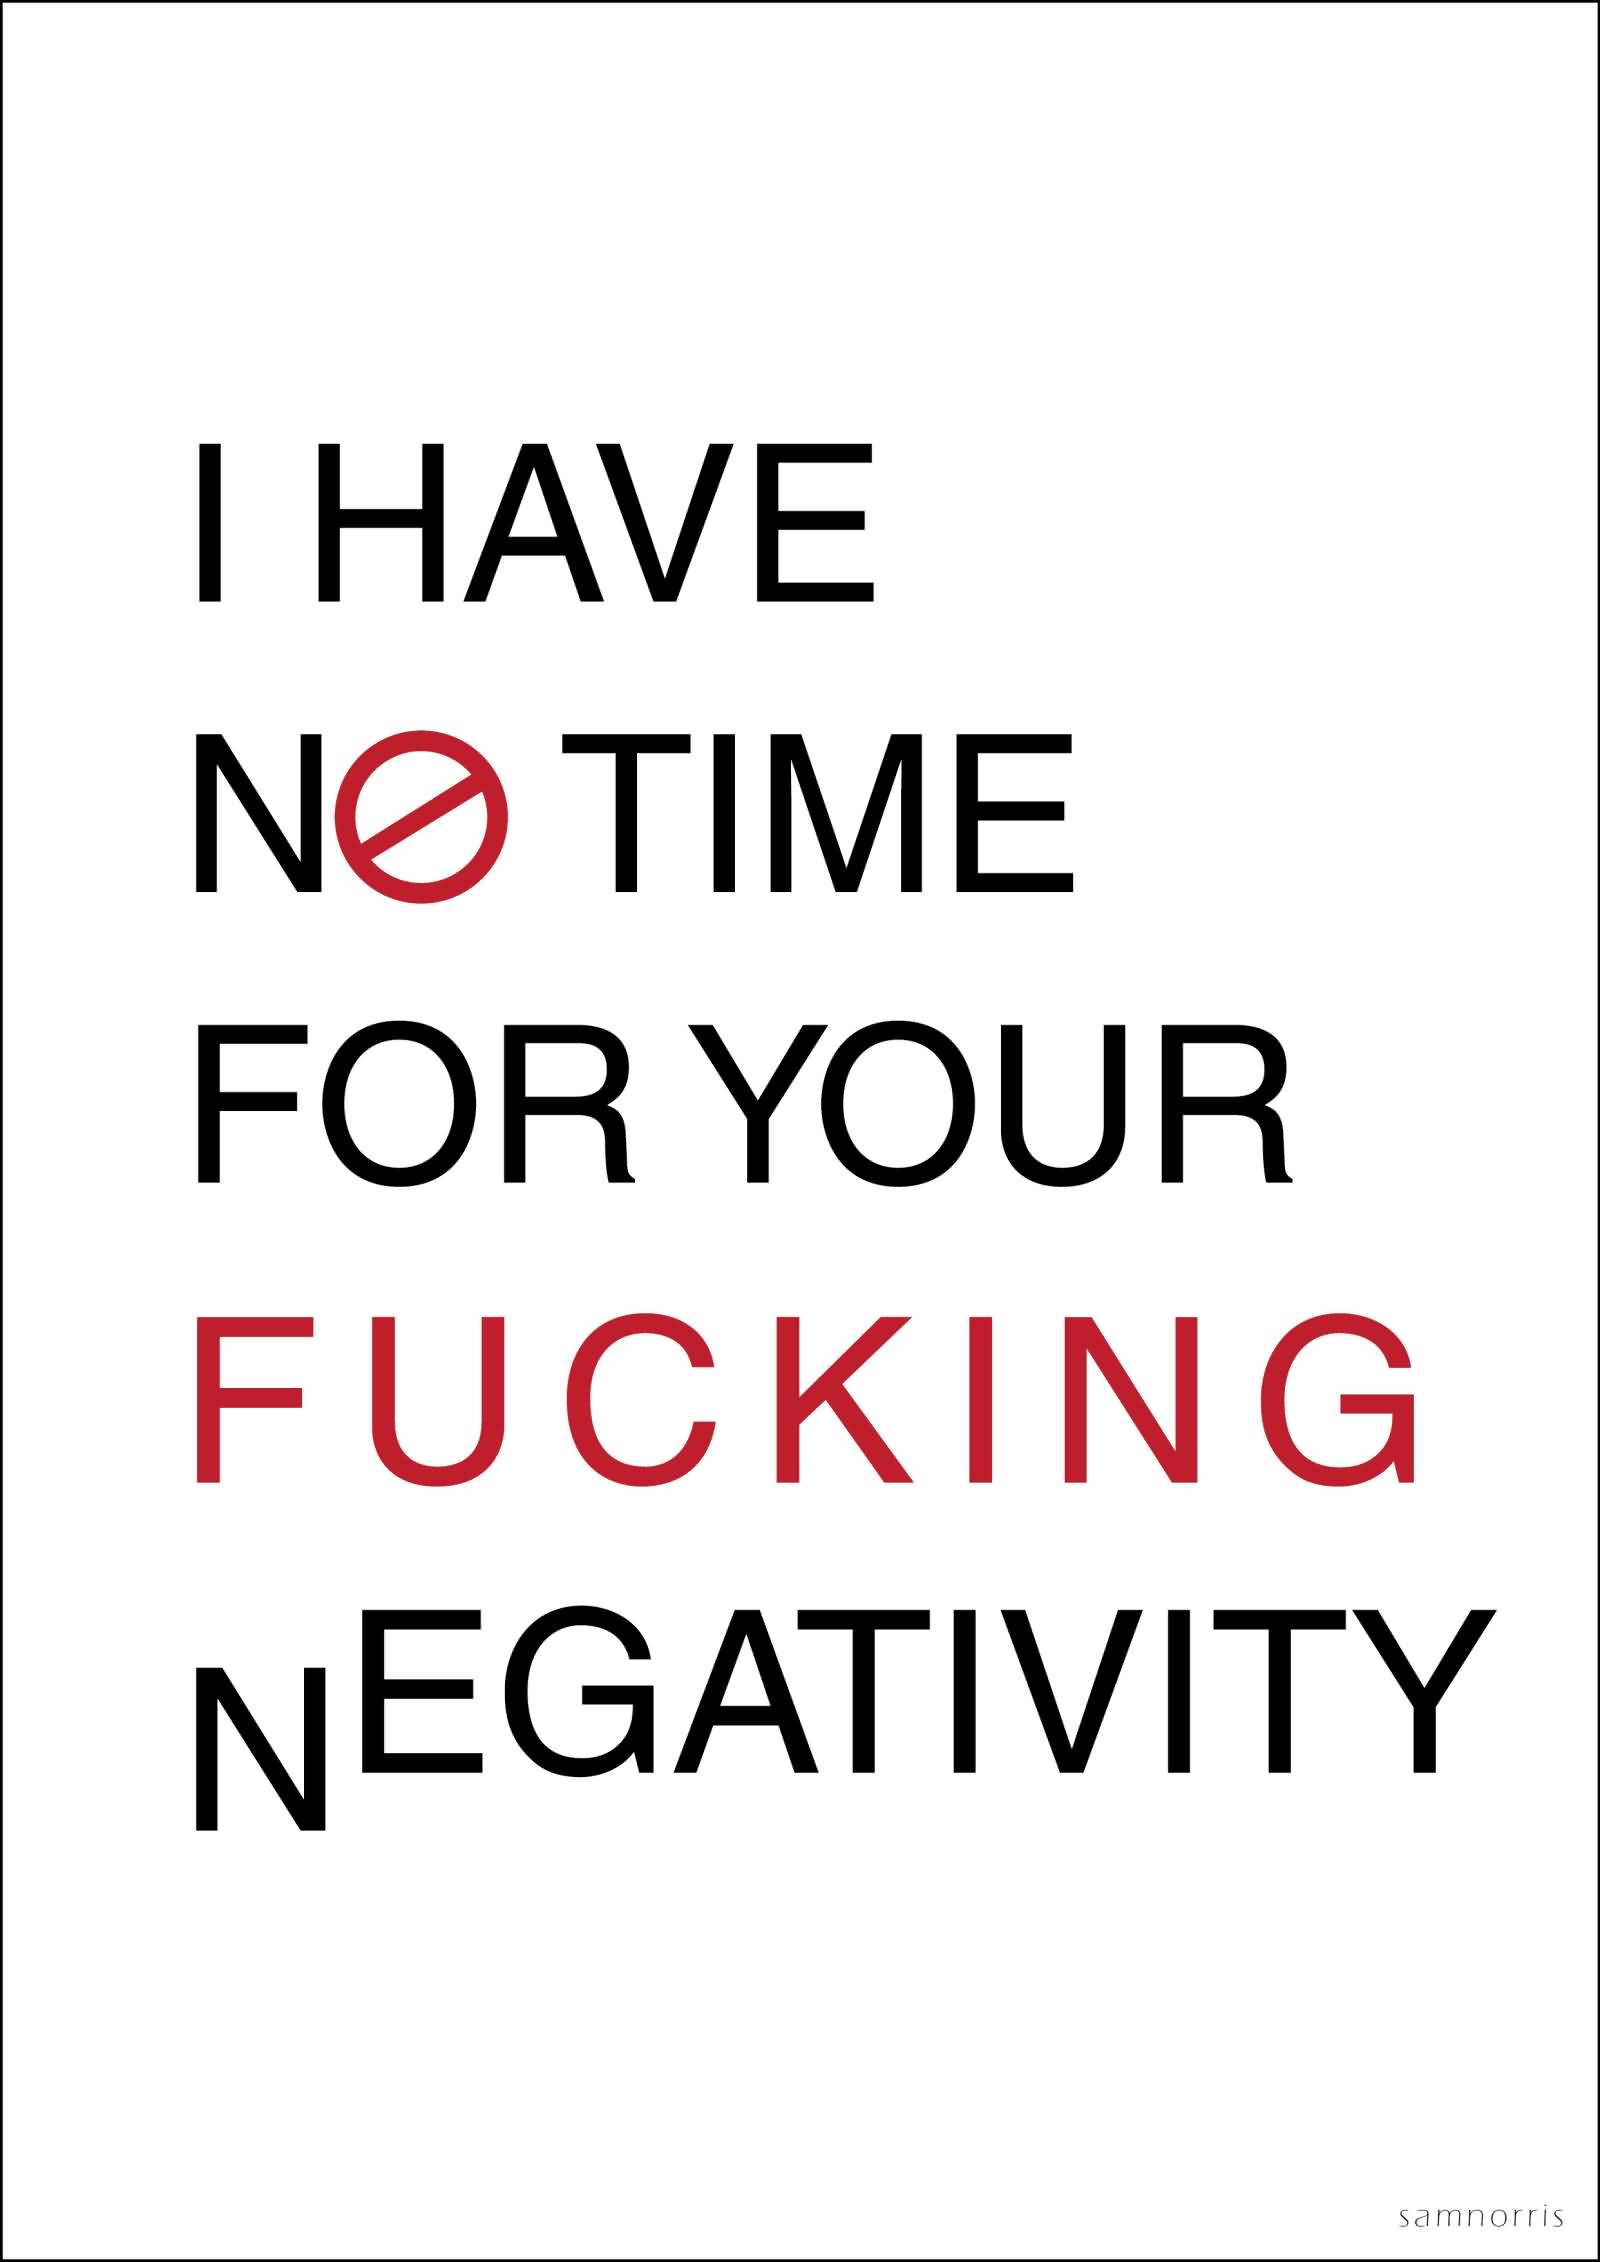 I have no time for your fucking negativity